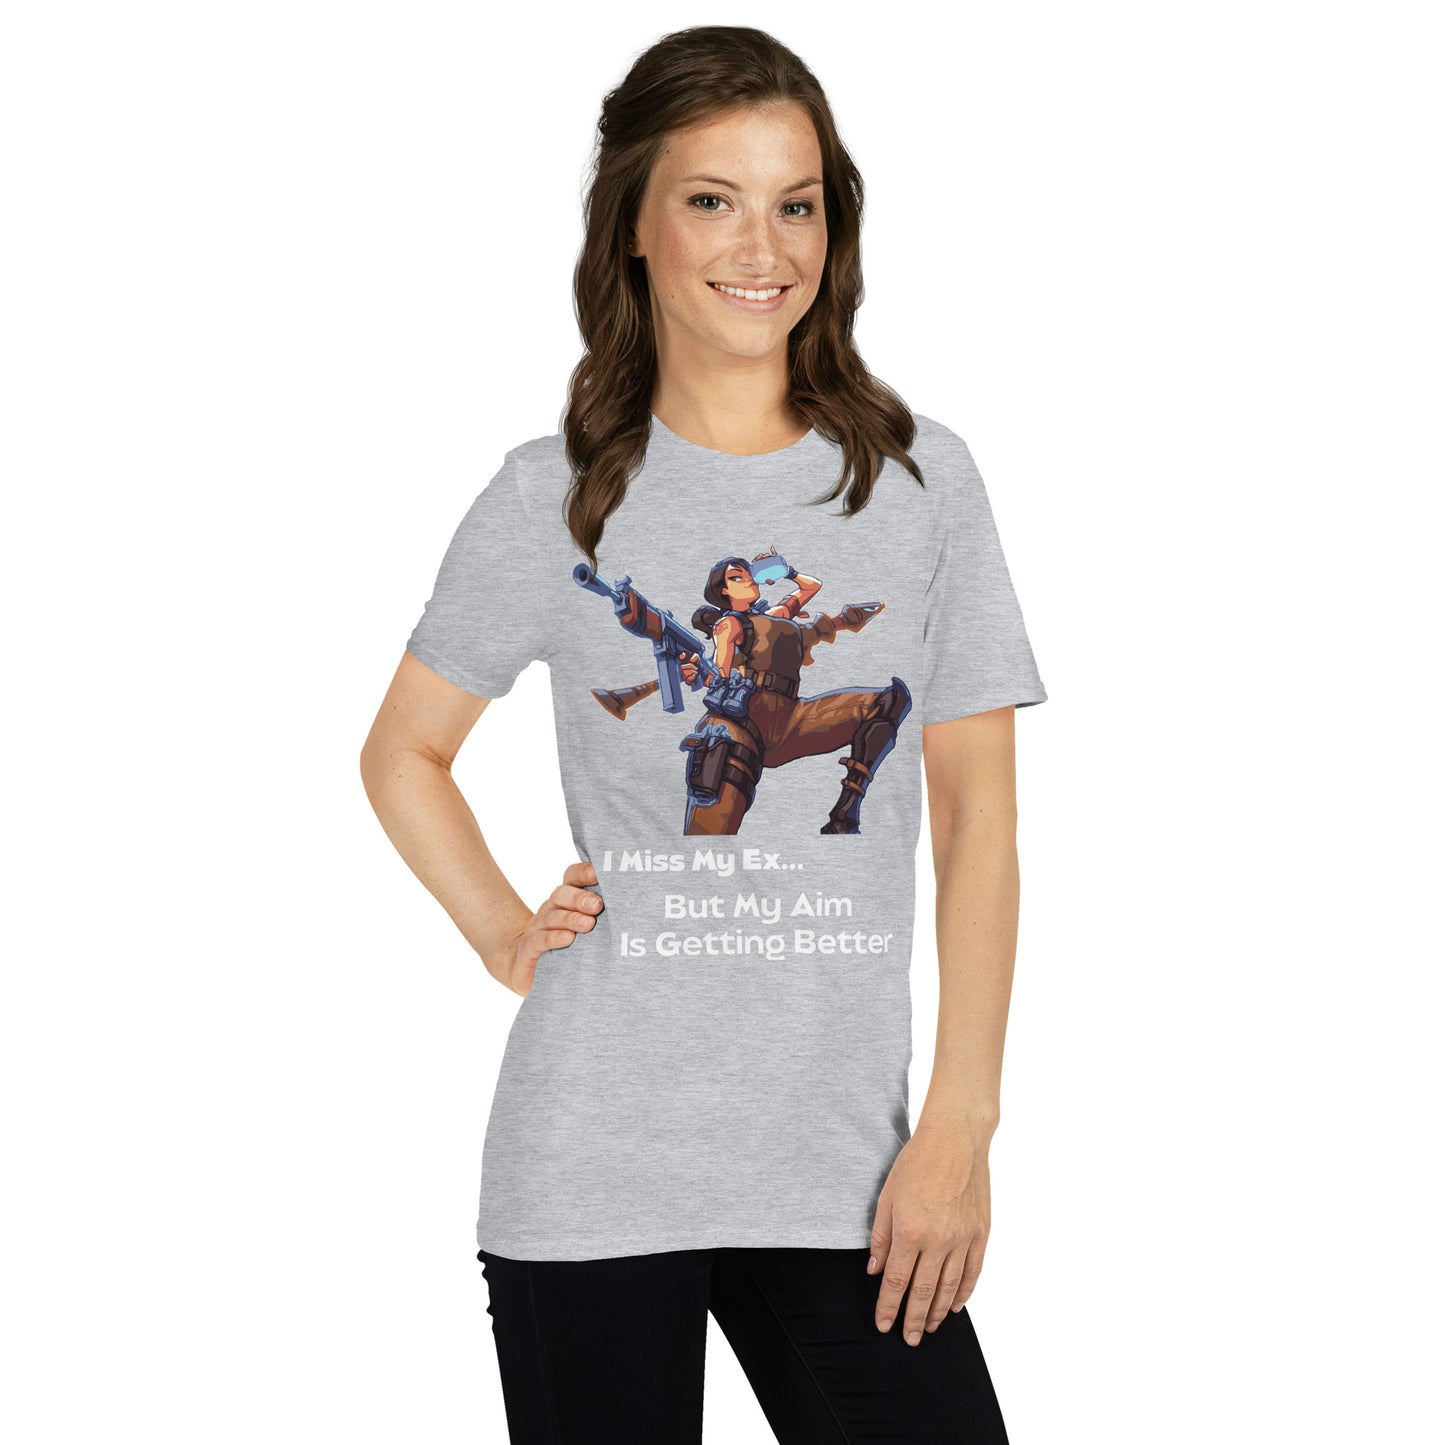 I Miss My Ex But My Aim Is Getting Better Short-Sleeve Unisex T-Shirt